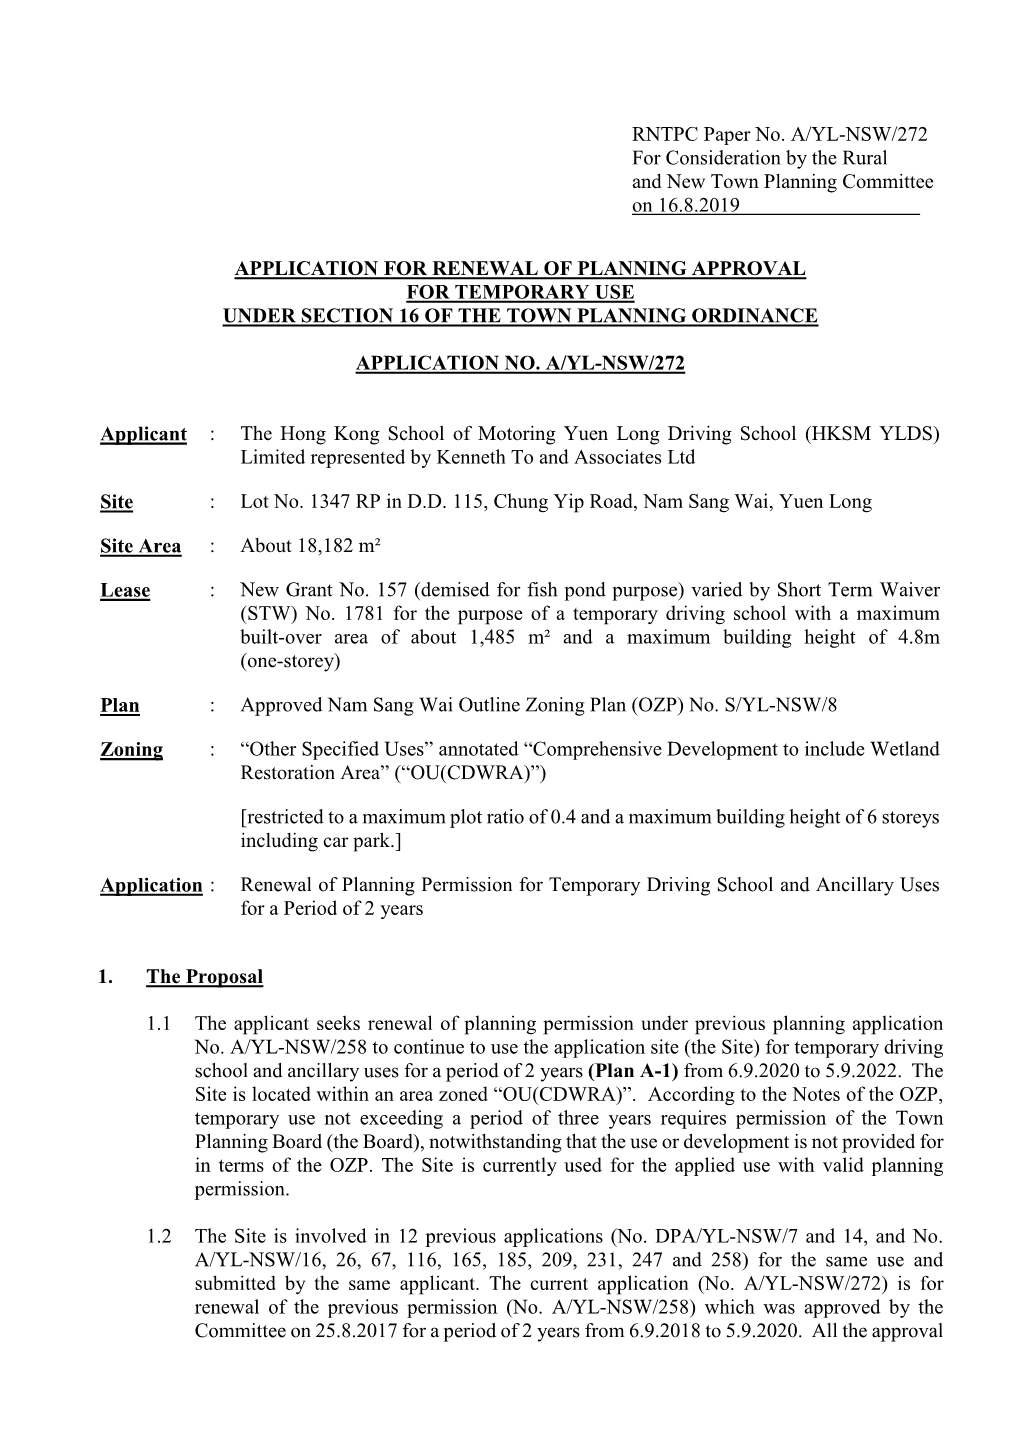 RNTPC Paper No. A/YL-NSW/272 for Consideration by the Rural and New Town Planning Committee on 16.8.2019